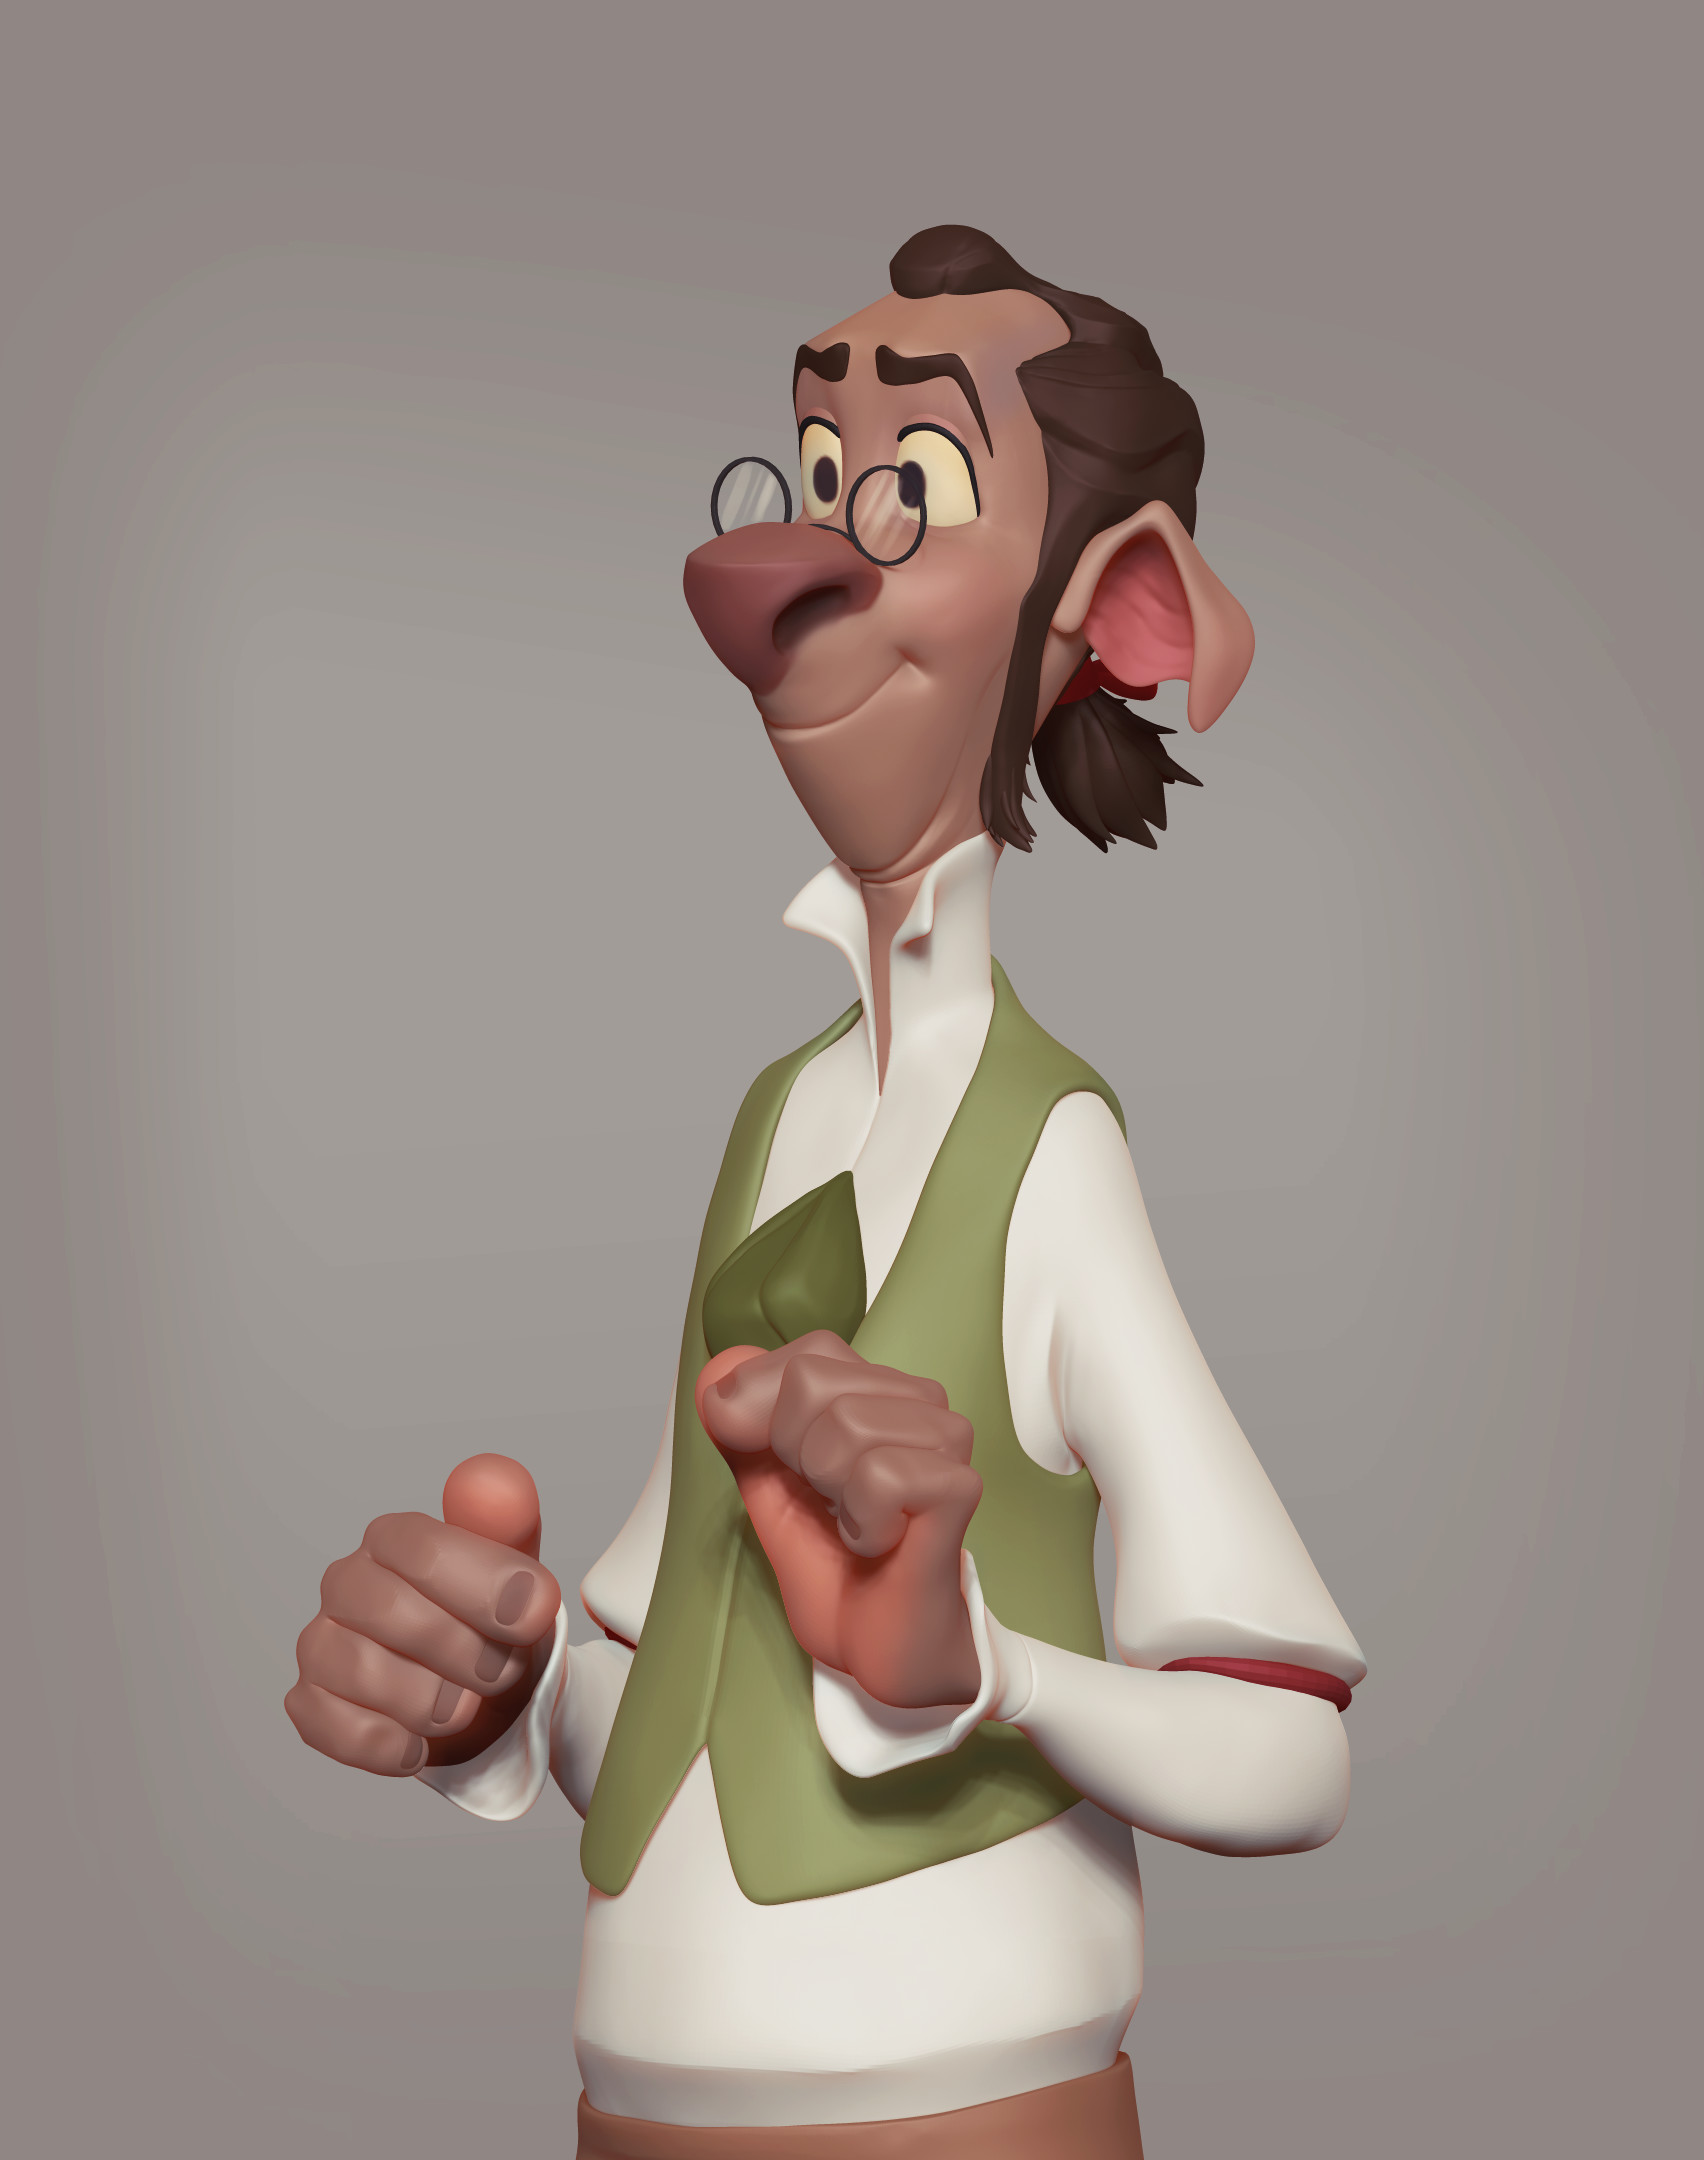 A sculpt of Dr.Doppler from Treasure planet I sculpted a while ago. 